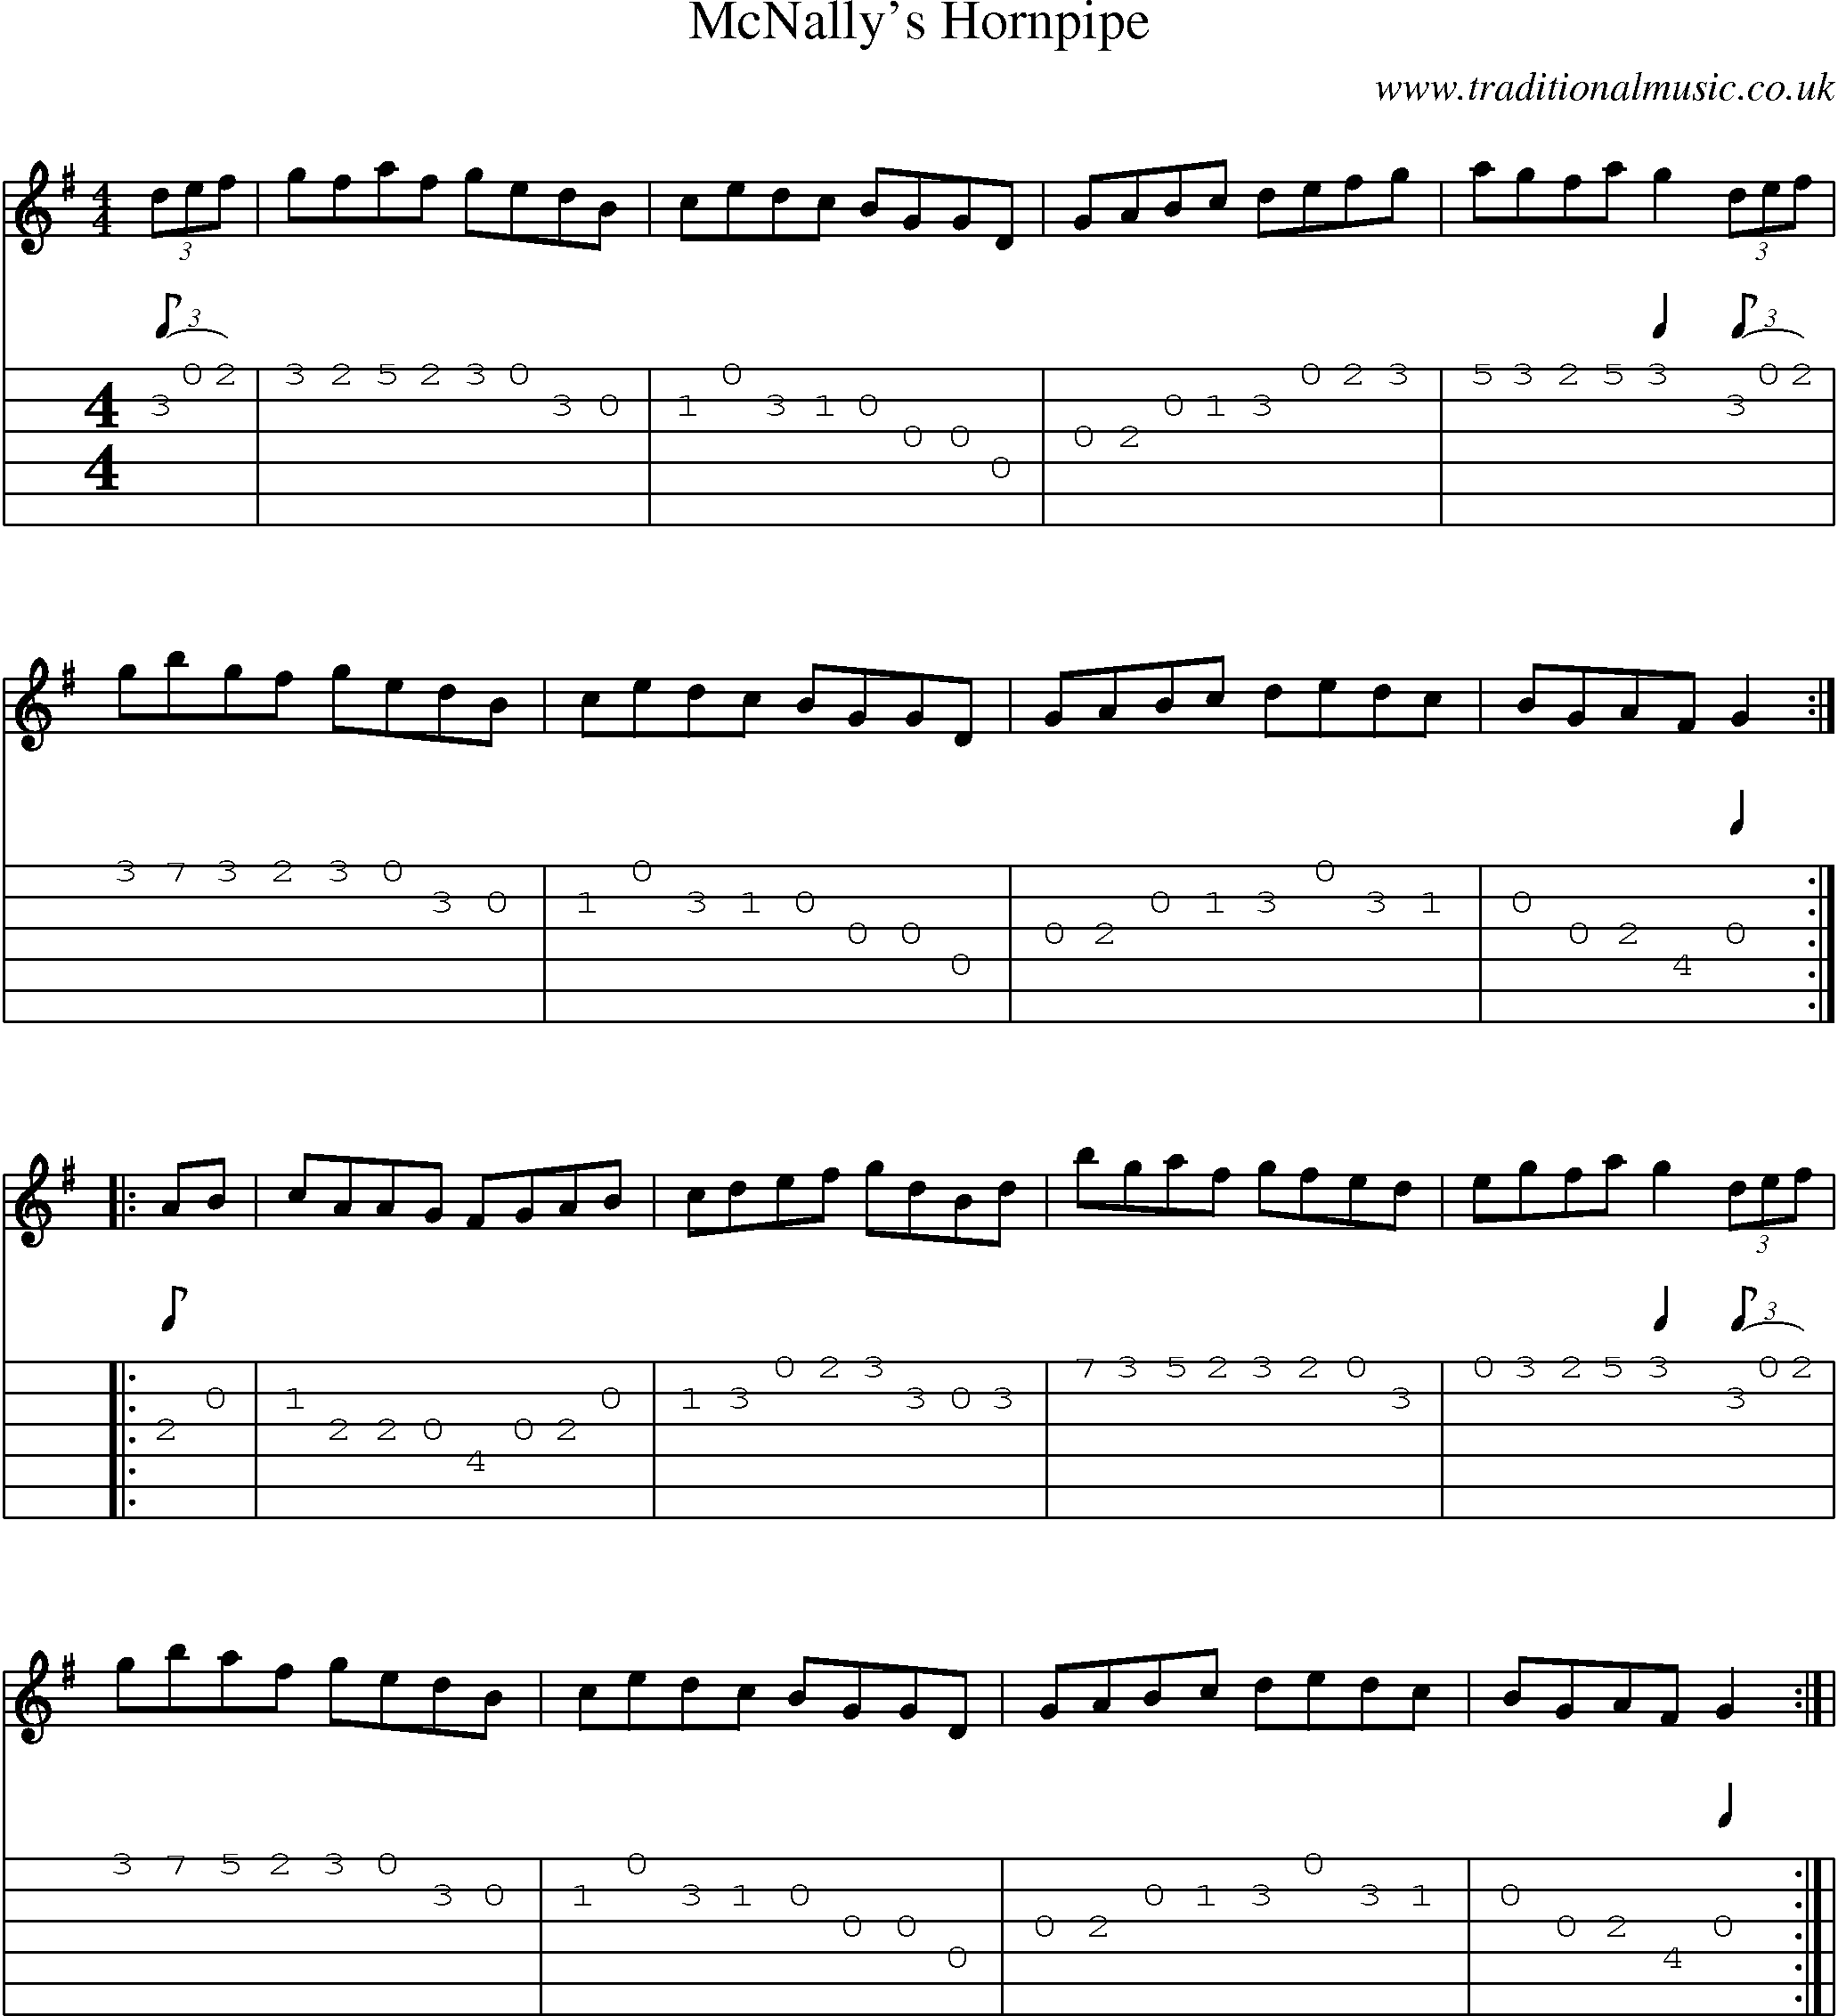 Music Score and Guitar Tabs for Mcnallys Hornpipe